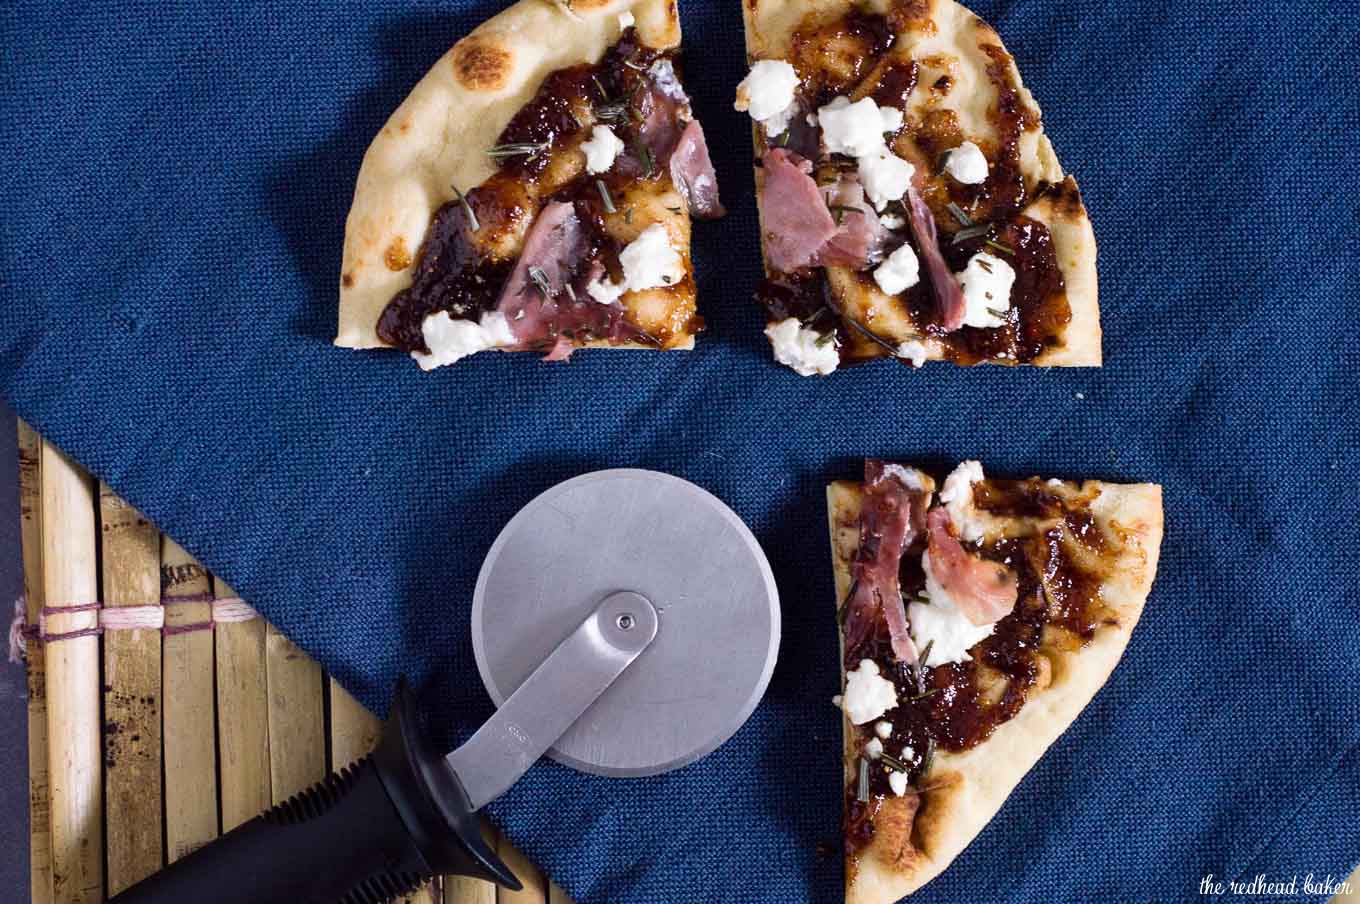 Indian flatbread makes a great crust for pizza! This na'an pizza is topped with fig jam, tangy goat cheese and salty prosciutto.